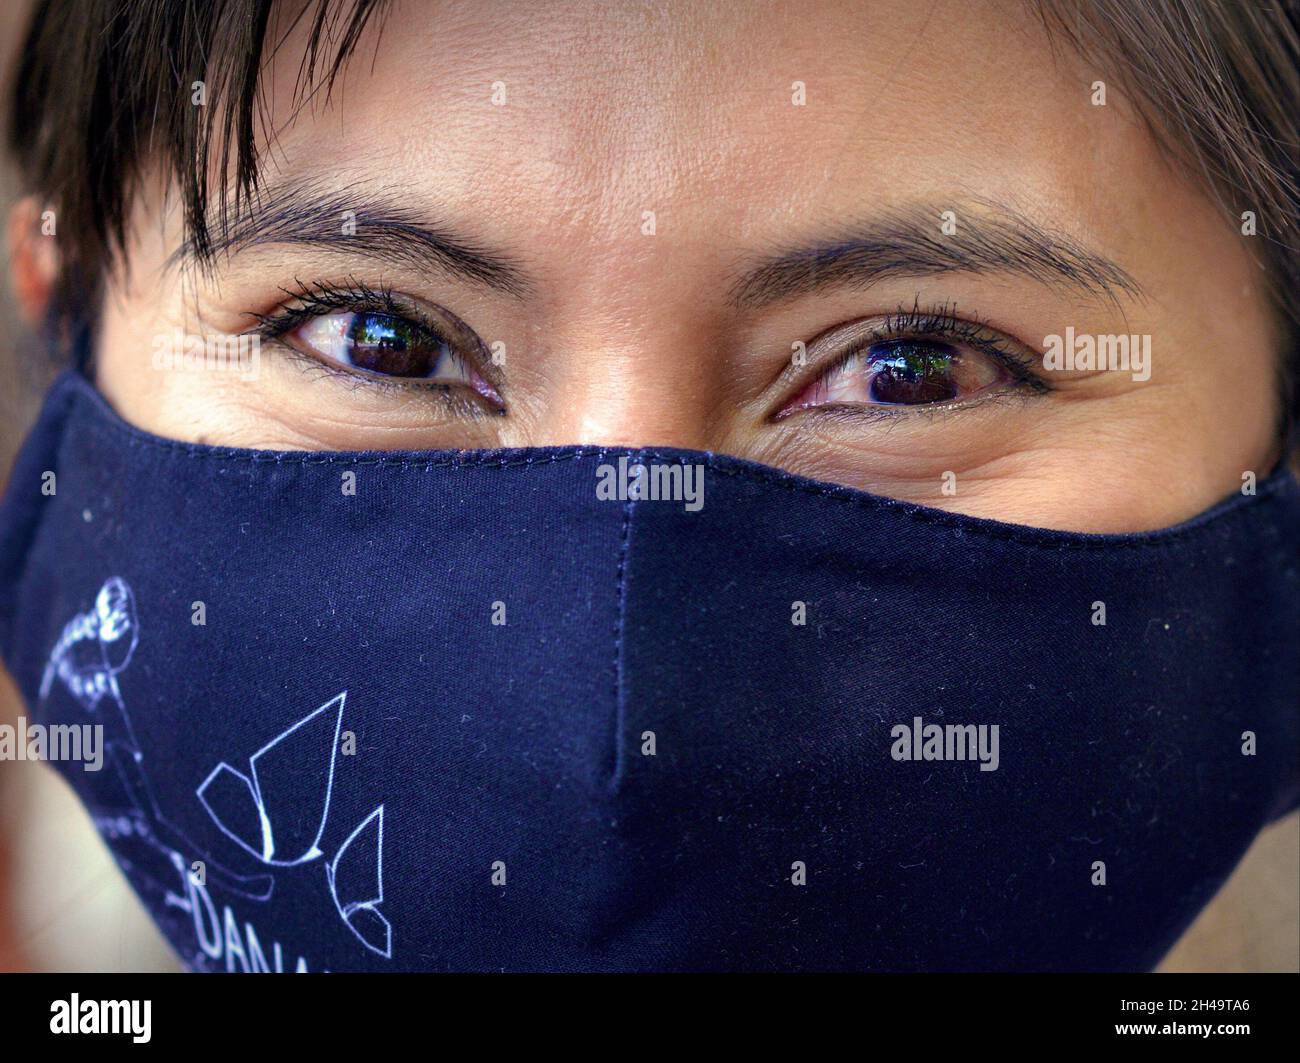 Young Mexican woman with smiling brown eyes wears a black cloth face mask during the global coronavirus pandemic and looks at the viewer. Stock Photo